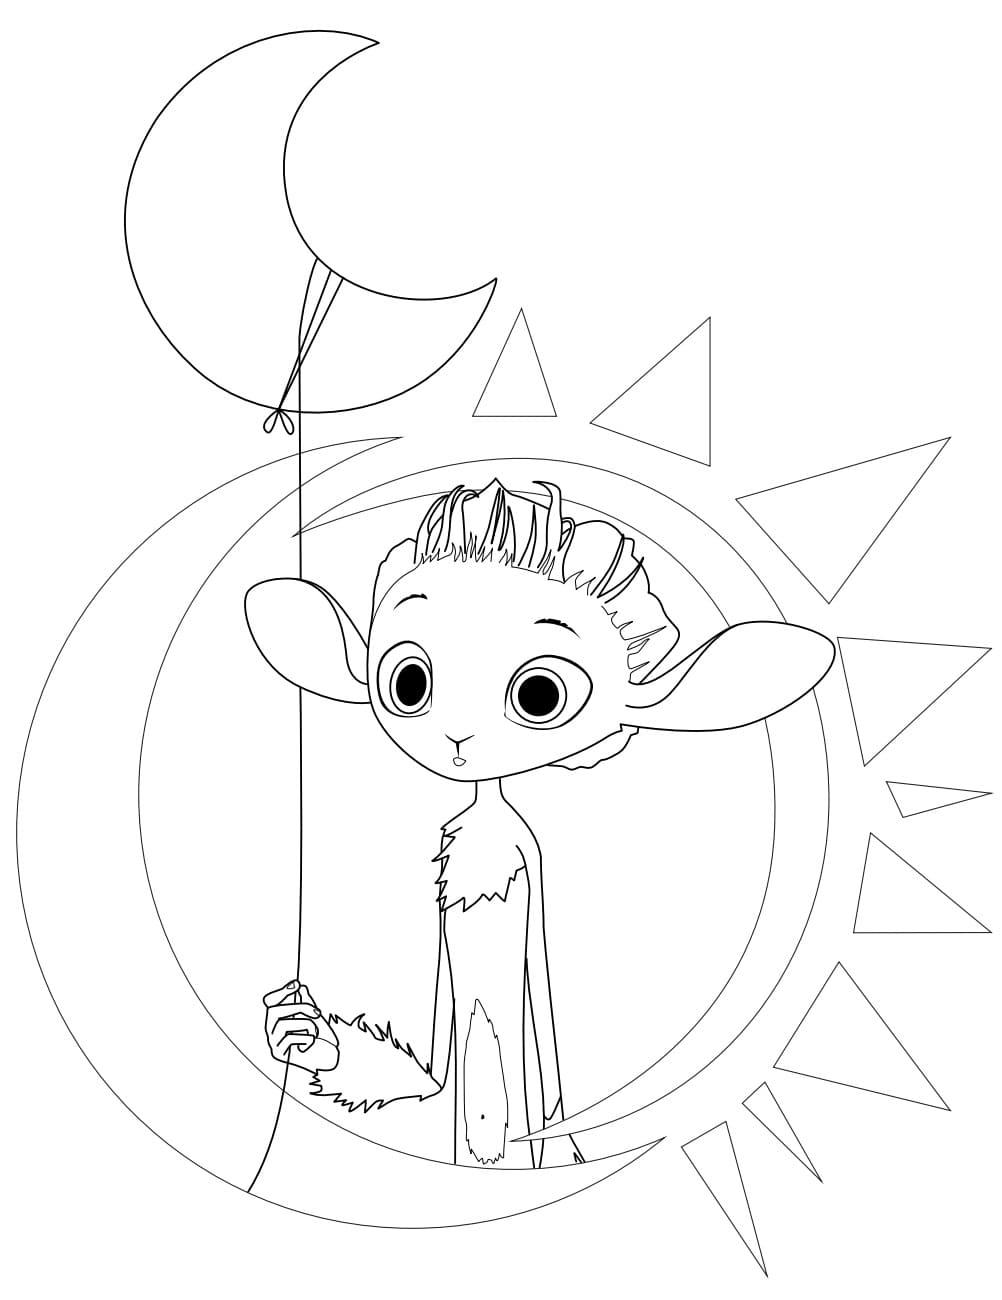 Mune coloring page